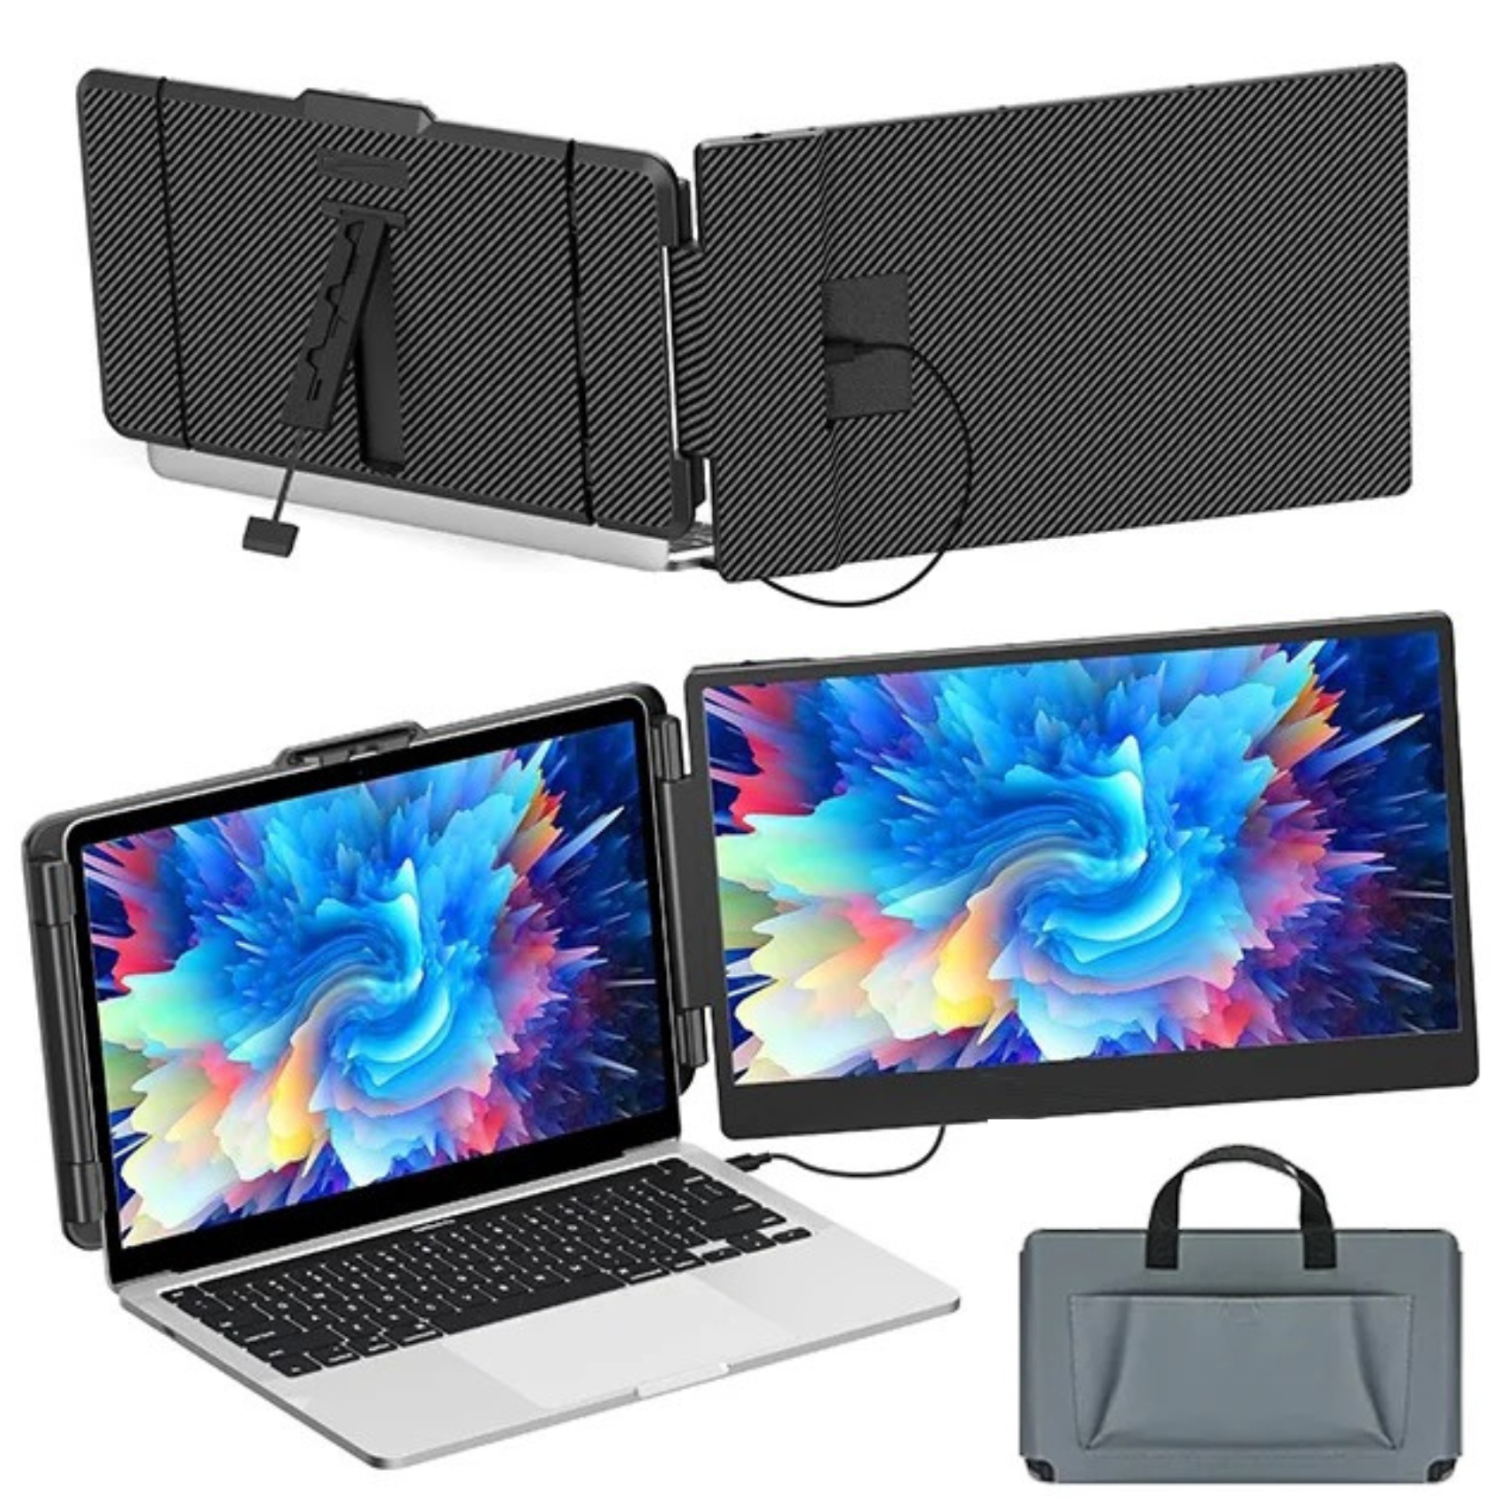 TUTT S1 Portable Laptop Monitor Screen Extender 14 Inch FHD 1080P IPS with Built-in Stand and Speakers, HDMI/Type-C Plug and Play Display for 13"-17" Laptops (Mac, Wins, Android)